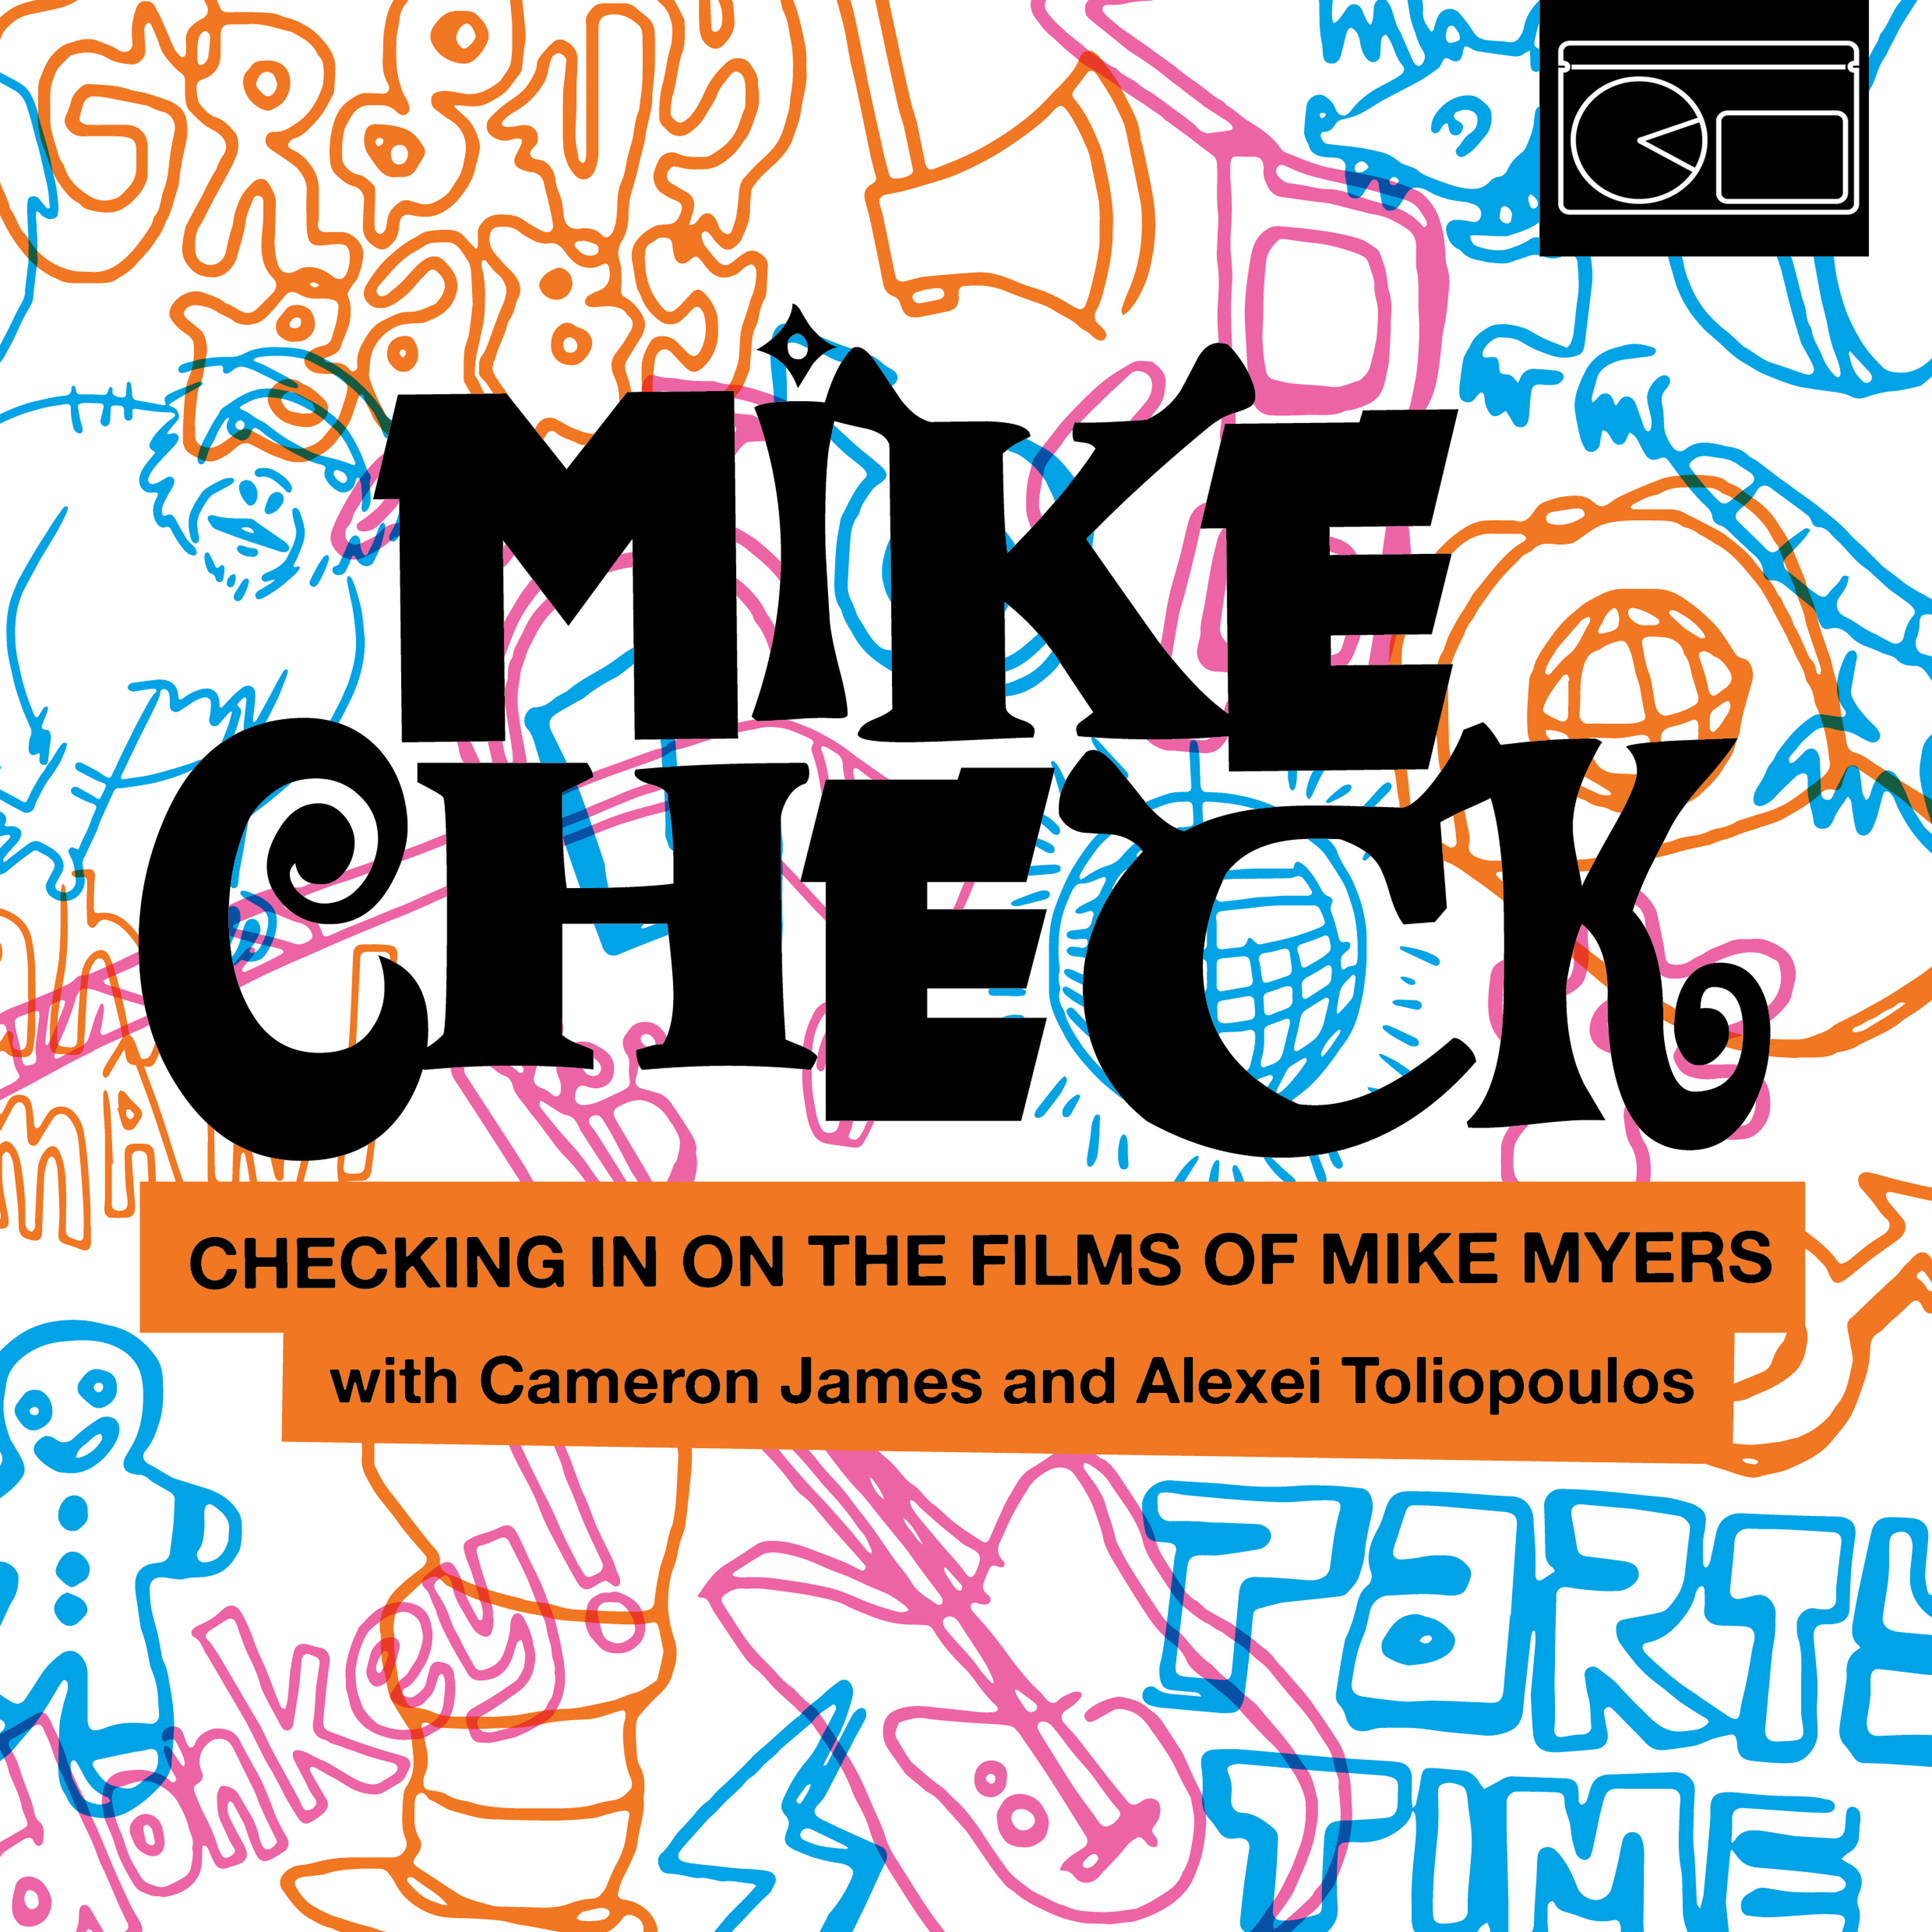 0. Welcome to MIKE CHECK, baby!